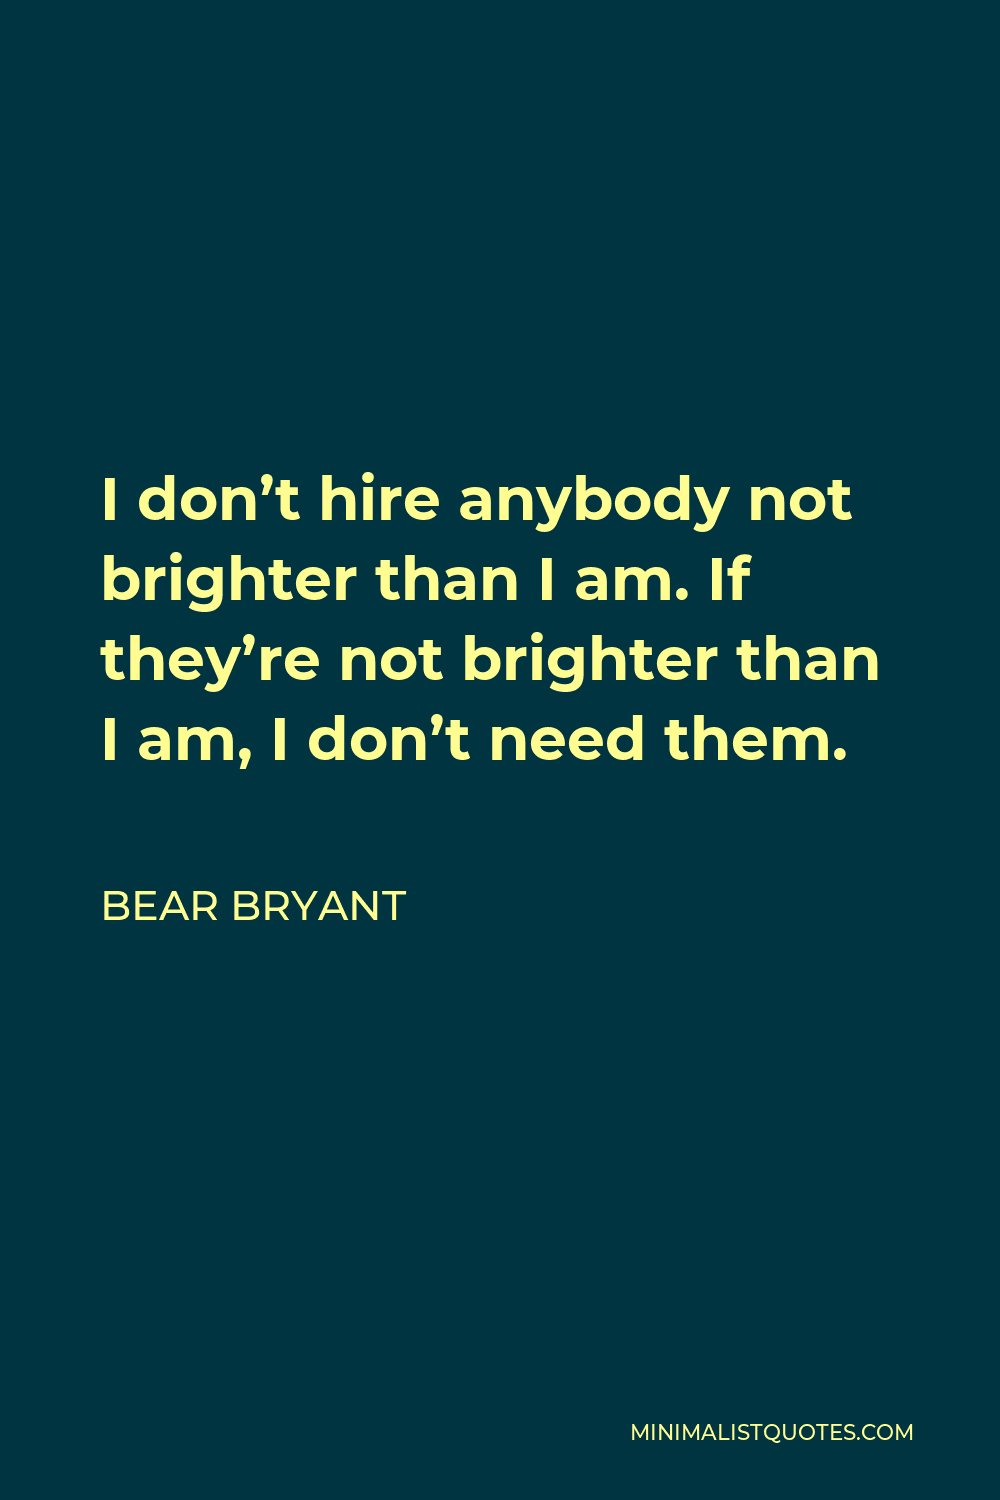 Bear Bryant Quote - I don’t hire anybody not brighter than I am. If they’re not brighter than I am, I don’t need them.